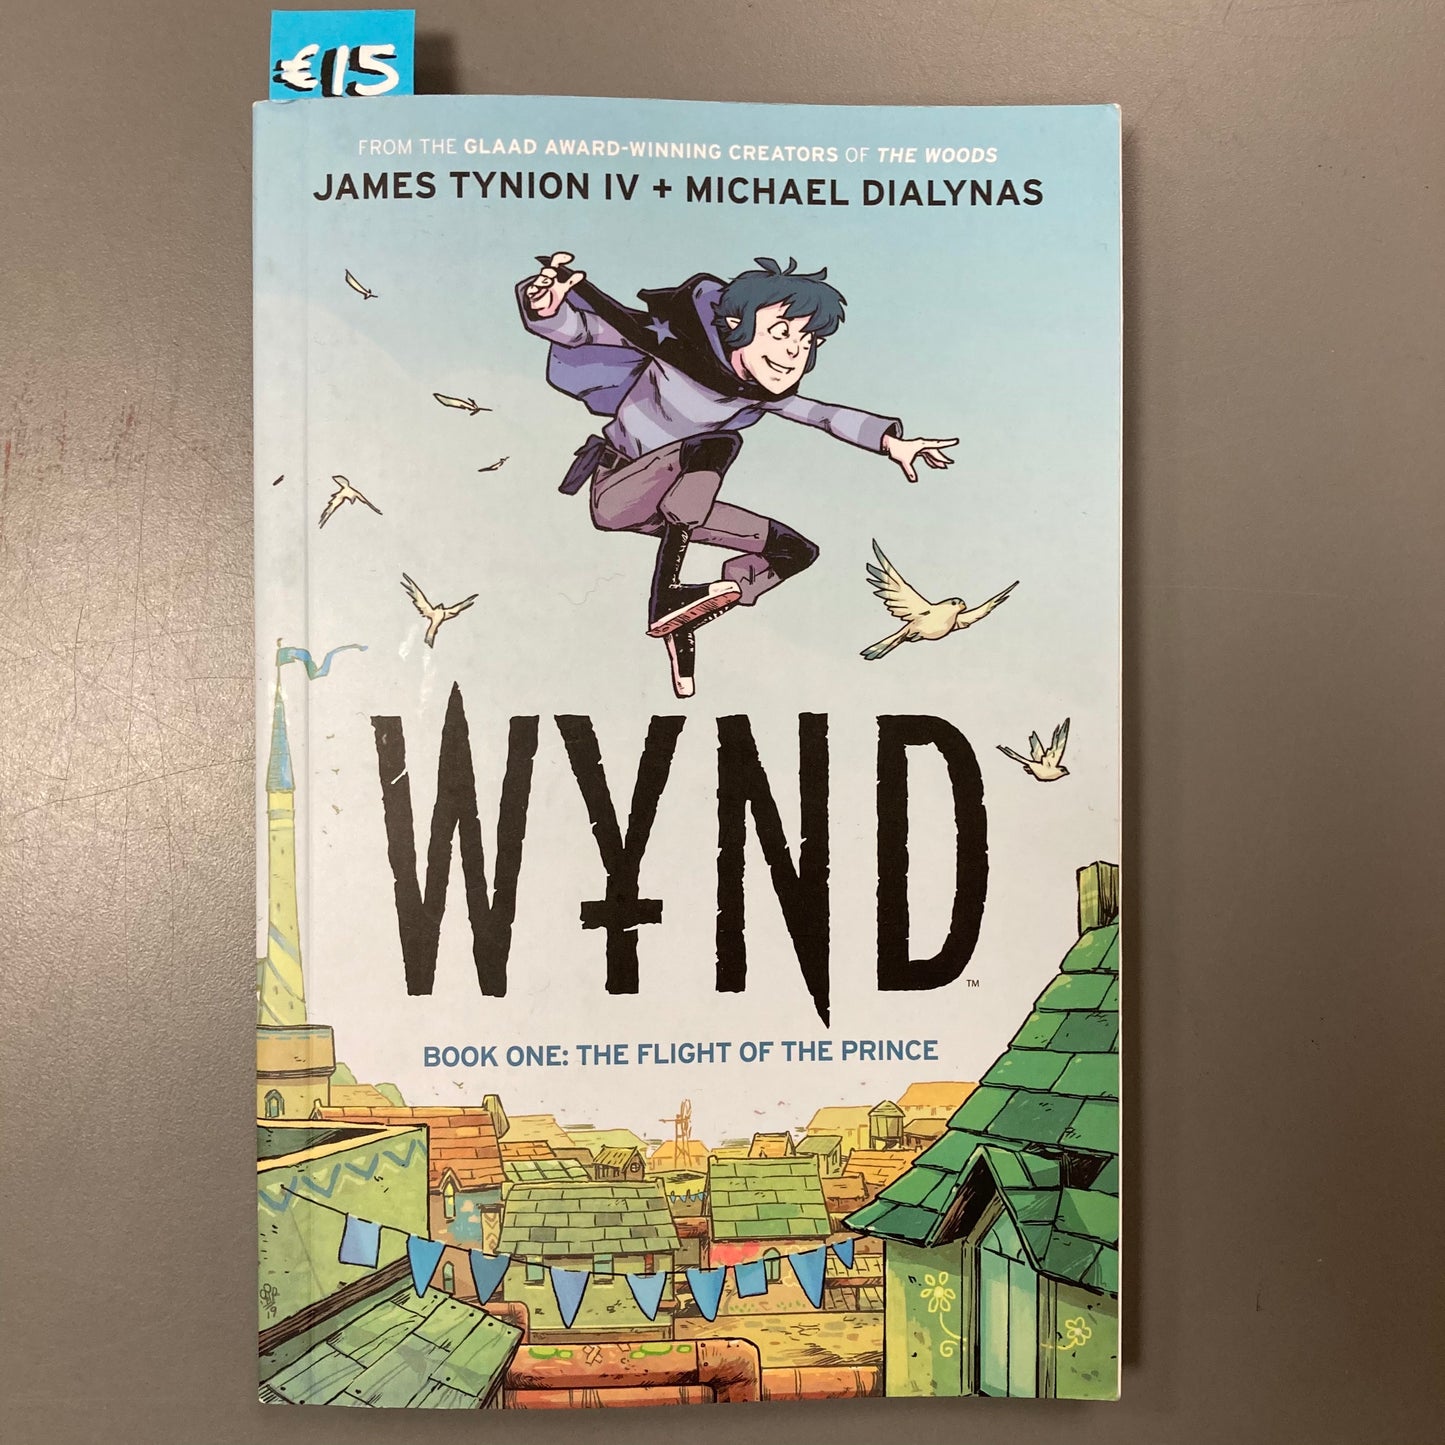 Wynd, Book One: The Flight of the Prince